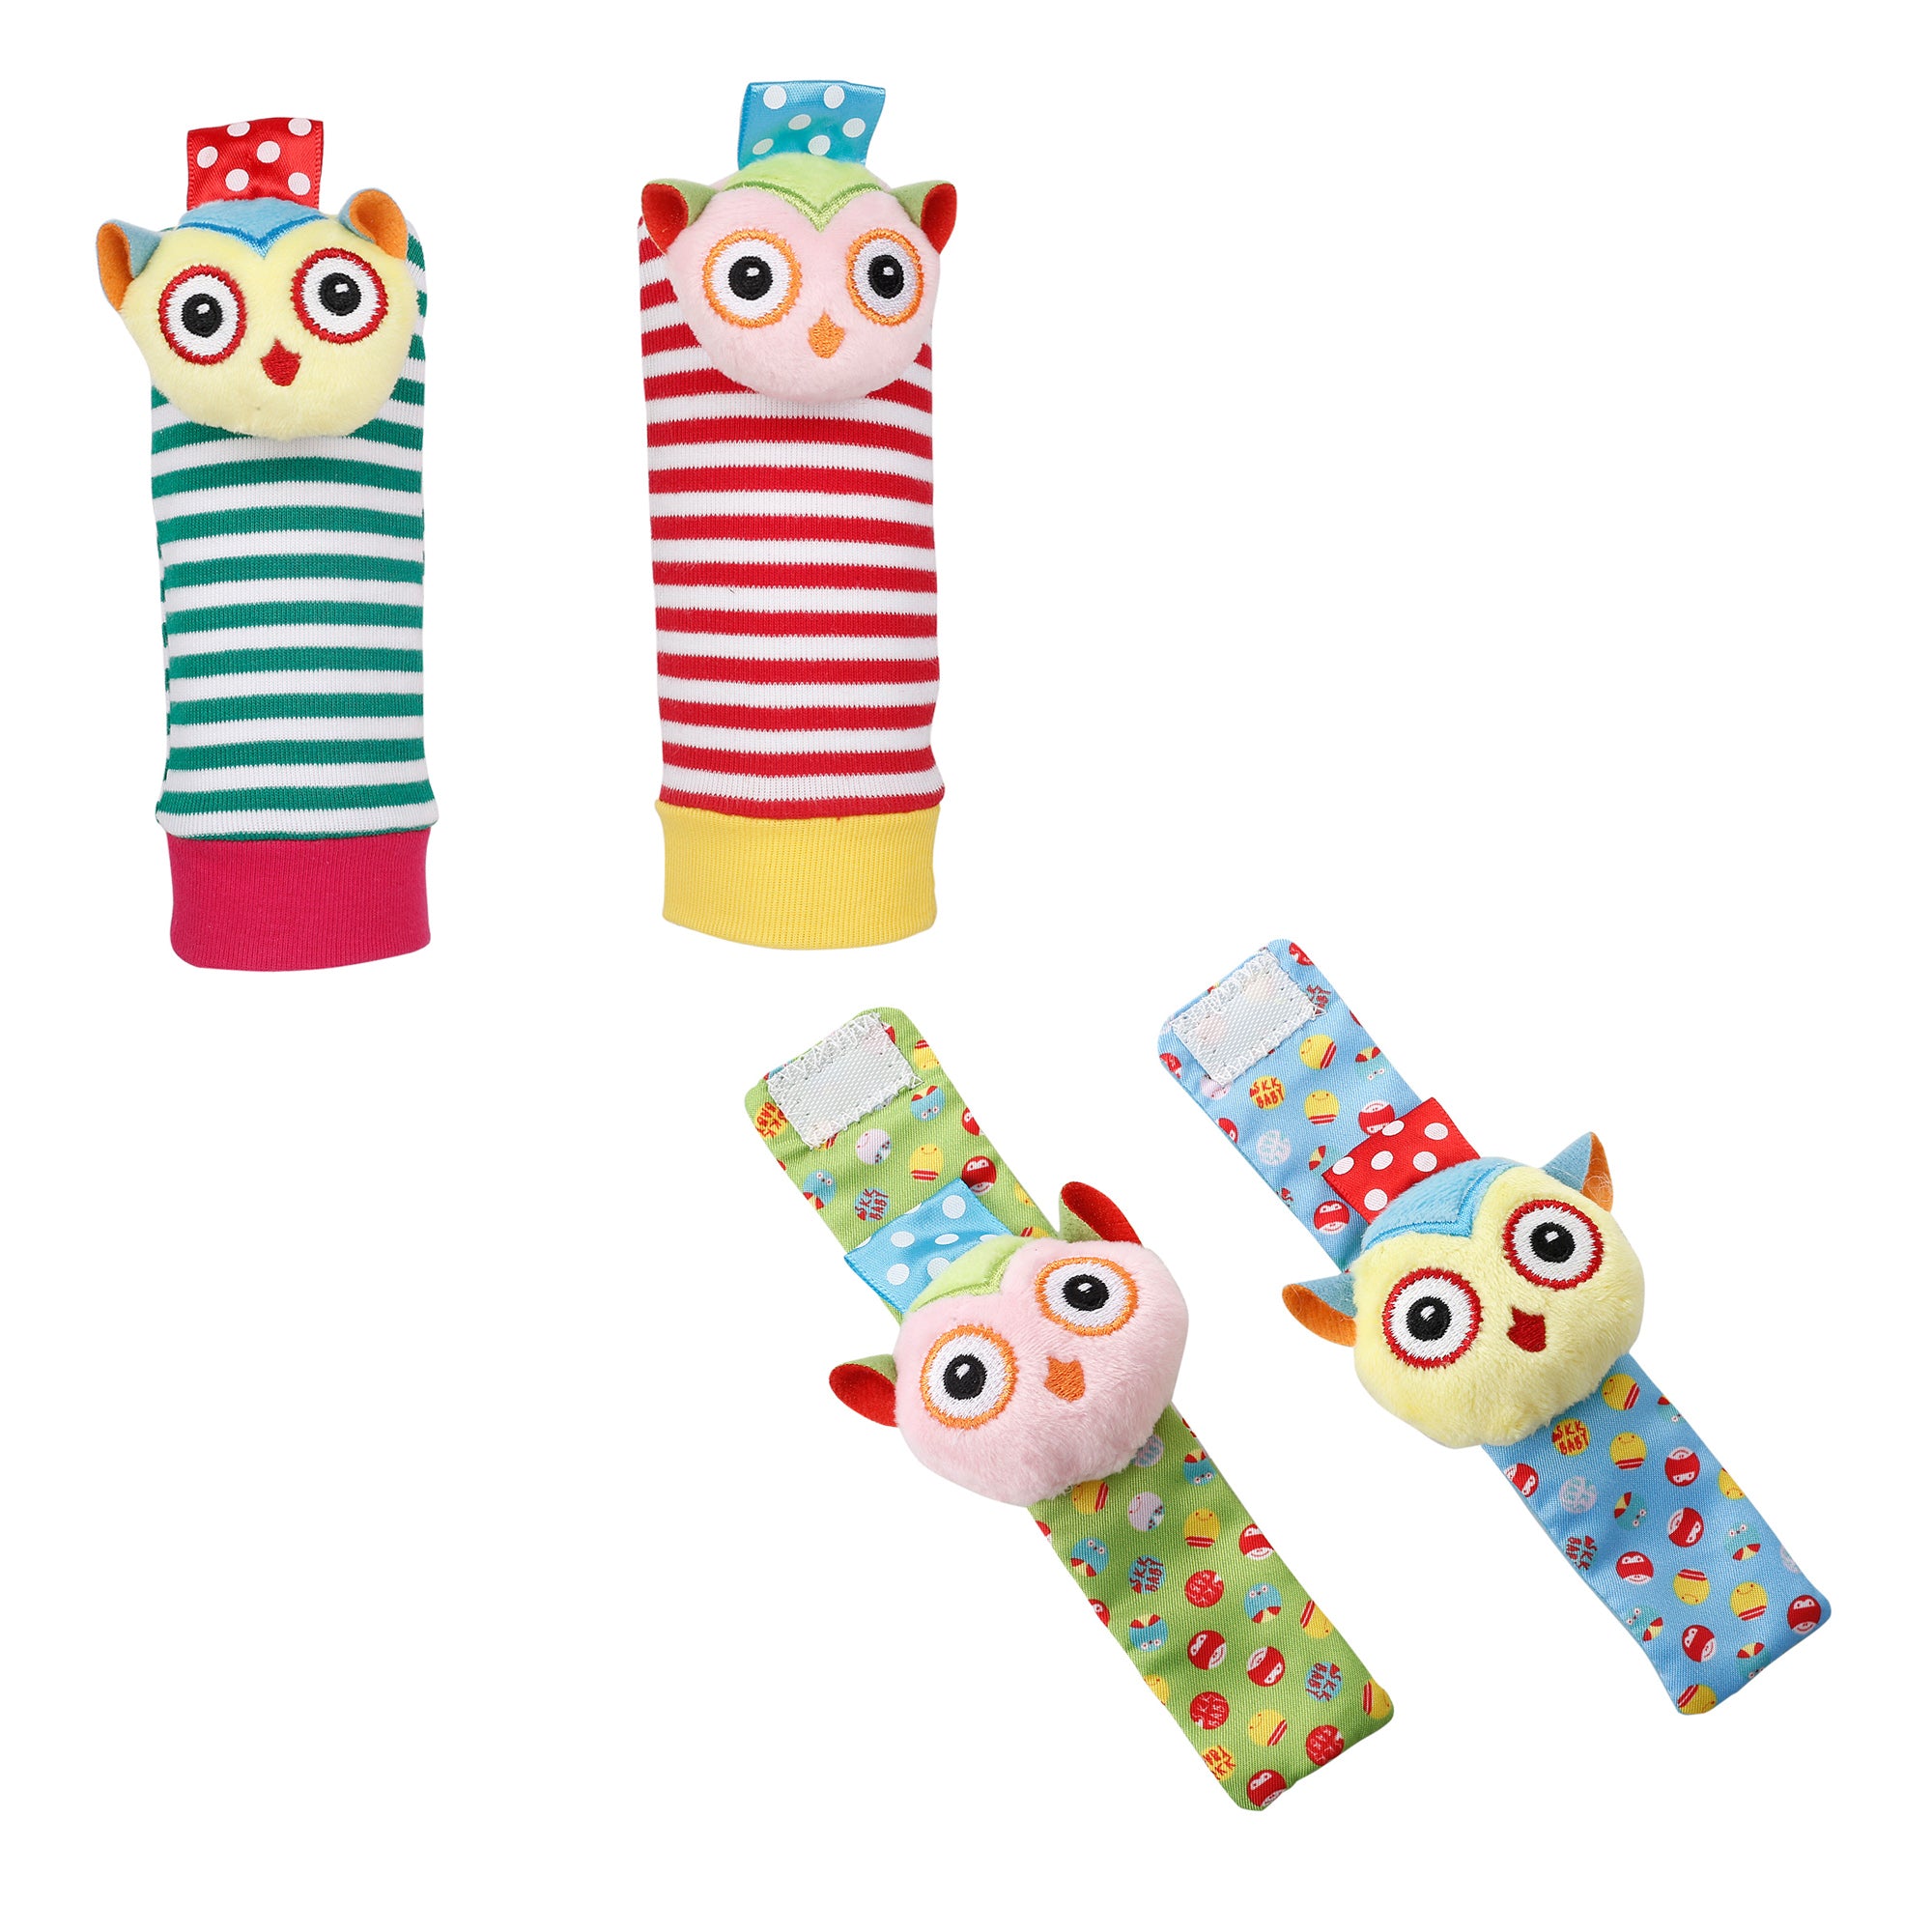 Owls In Love Multicolour Set of 4 Socks And Wrist Rattle